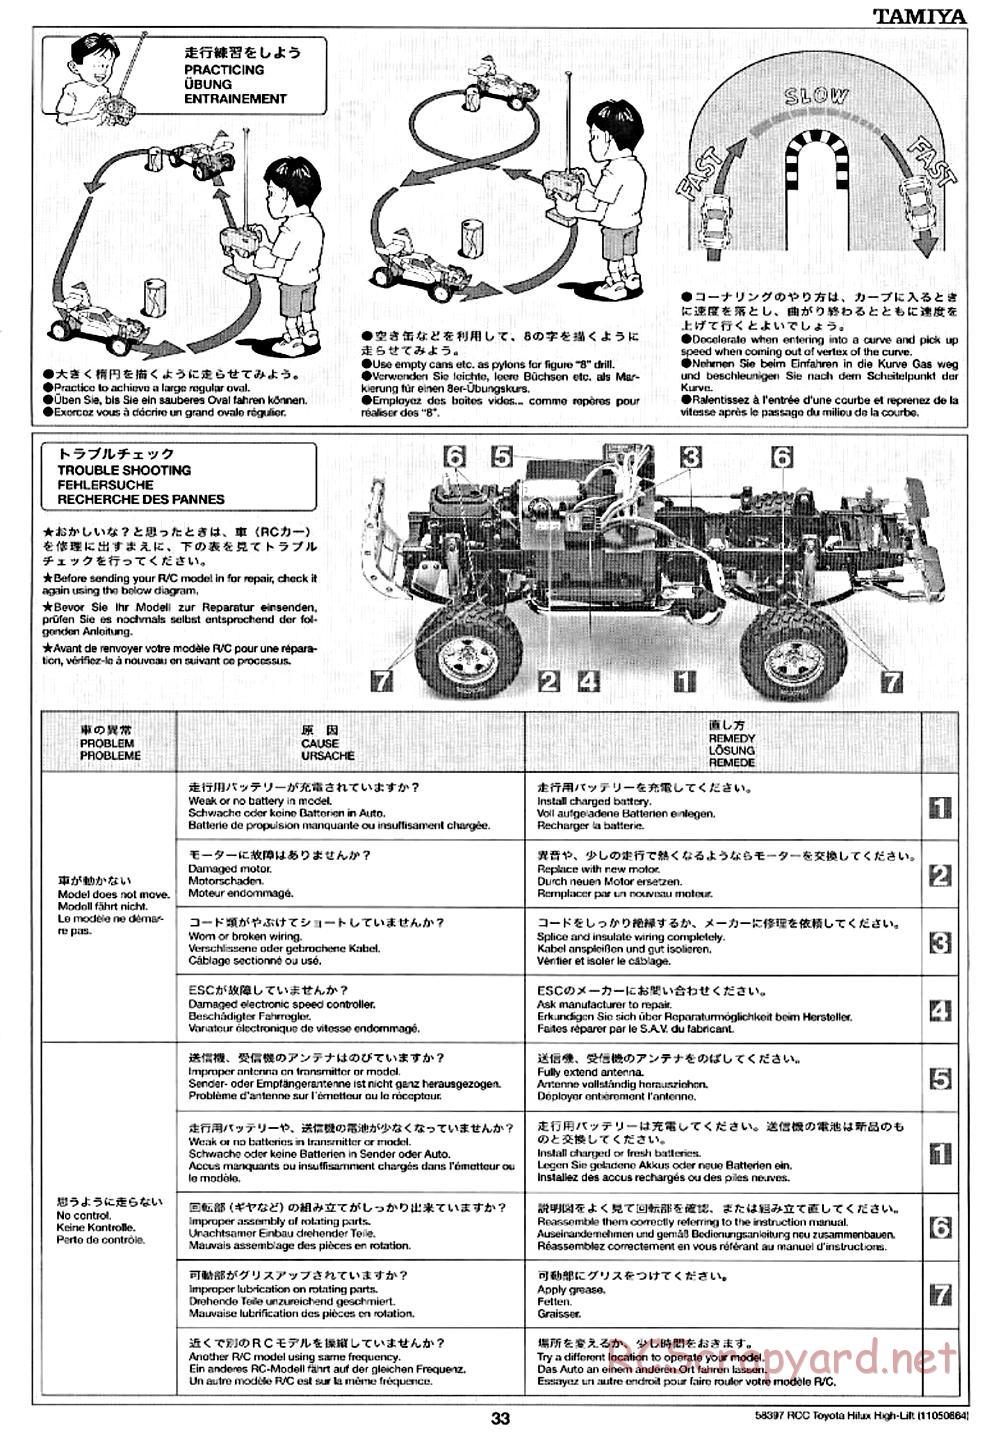 Tamiya - Toyota Hilux High-Lift Chassis - Manual - Page 28